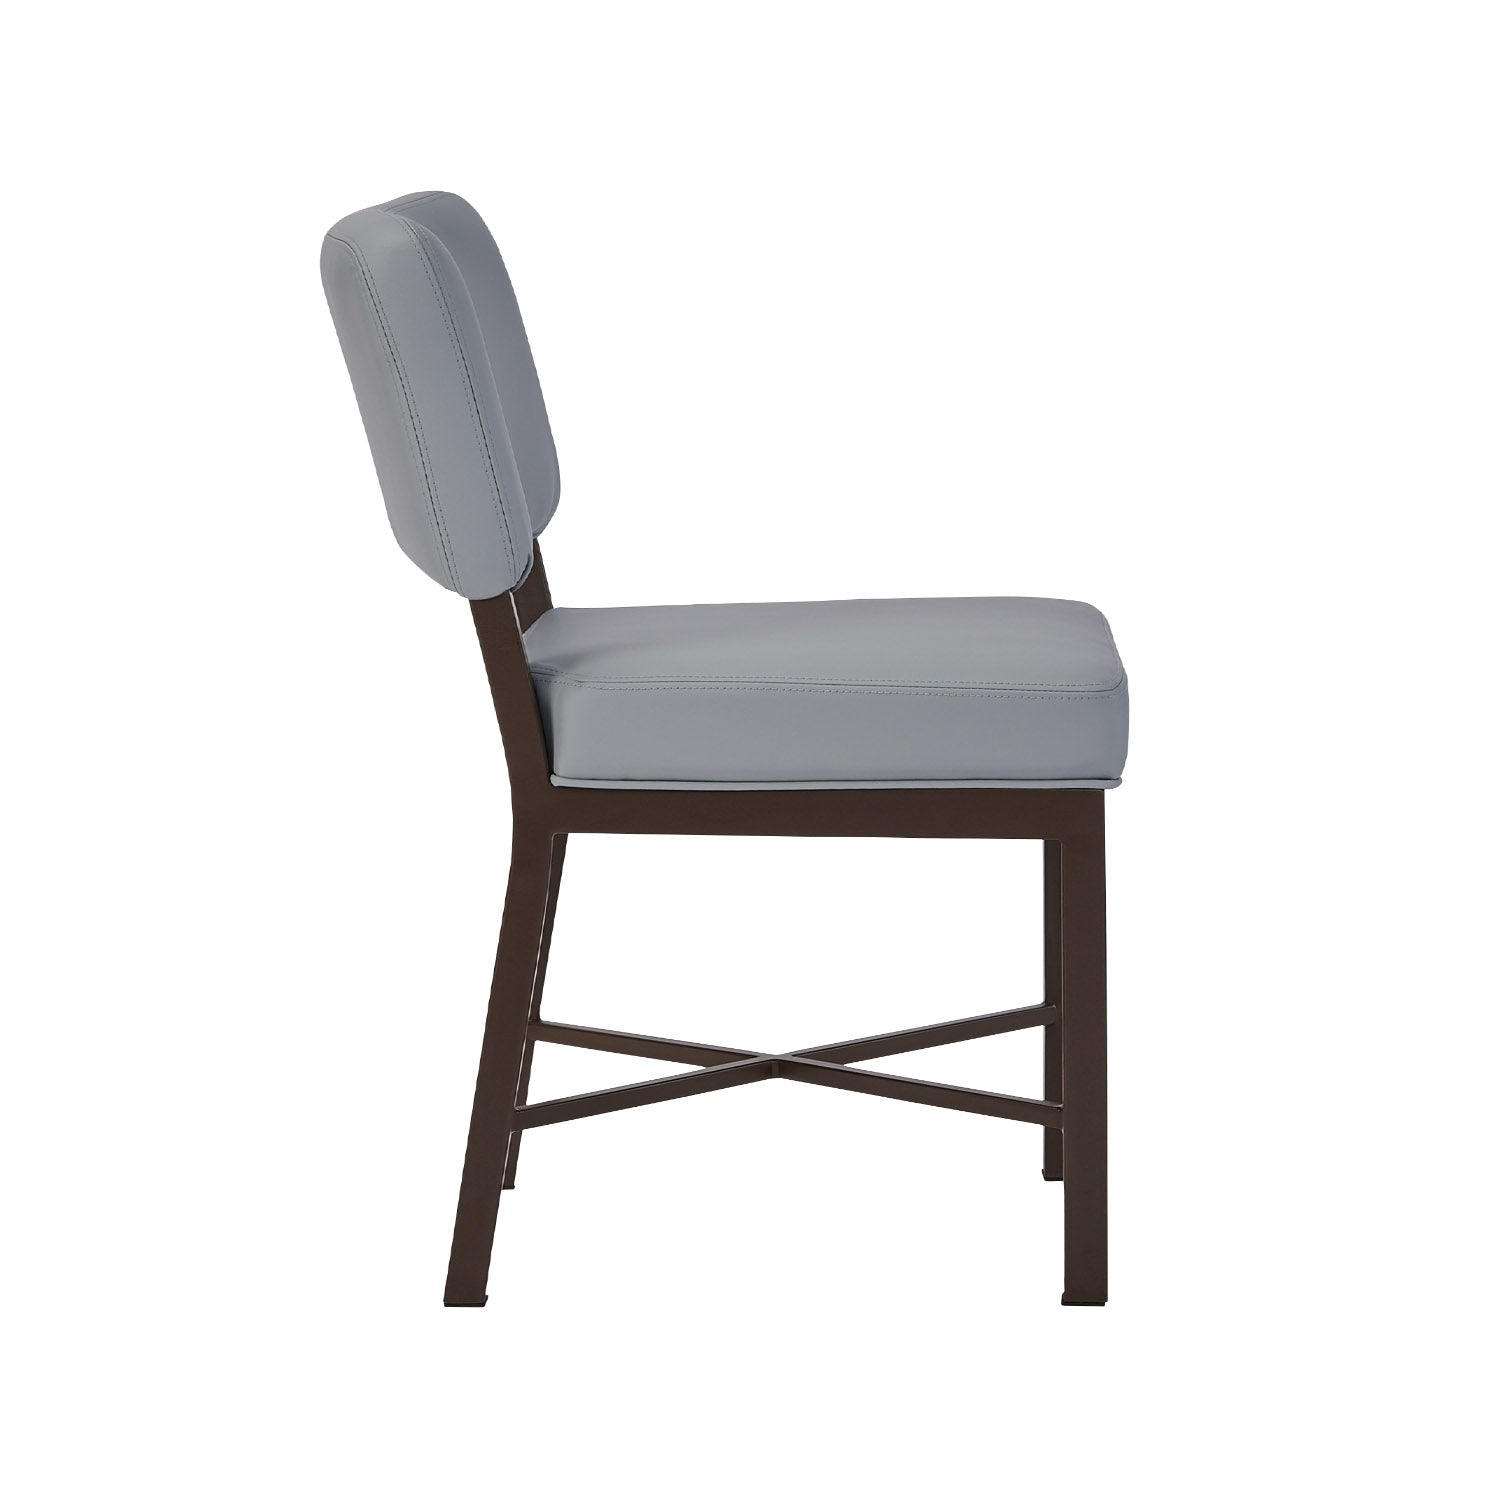 Wesley Allen Miami Chair with Dillon Steel Vinyl in Caapucino Finish. Side View